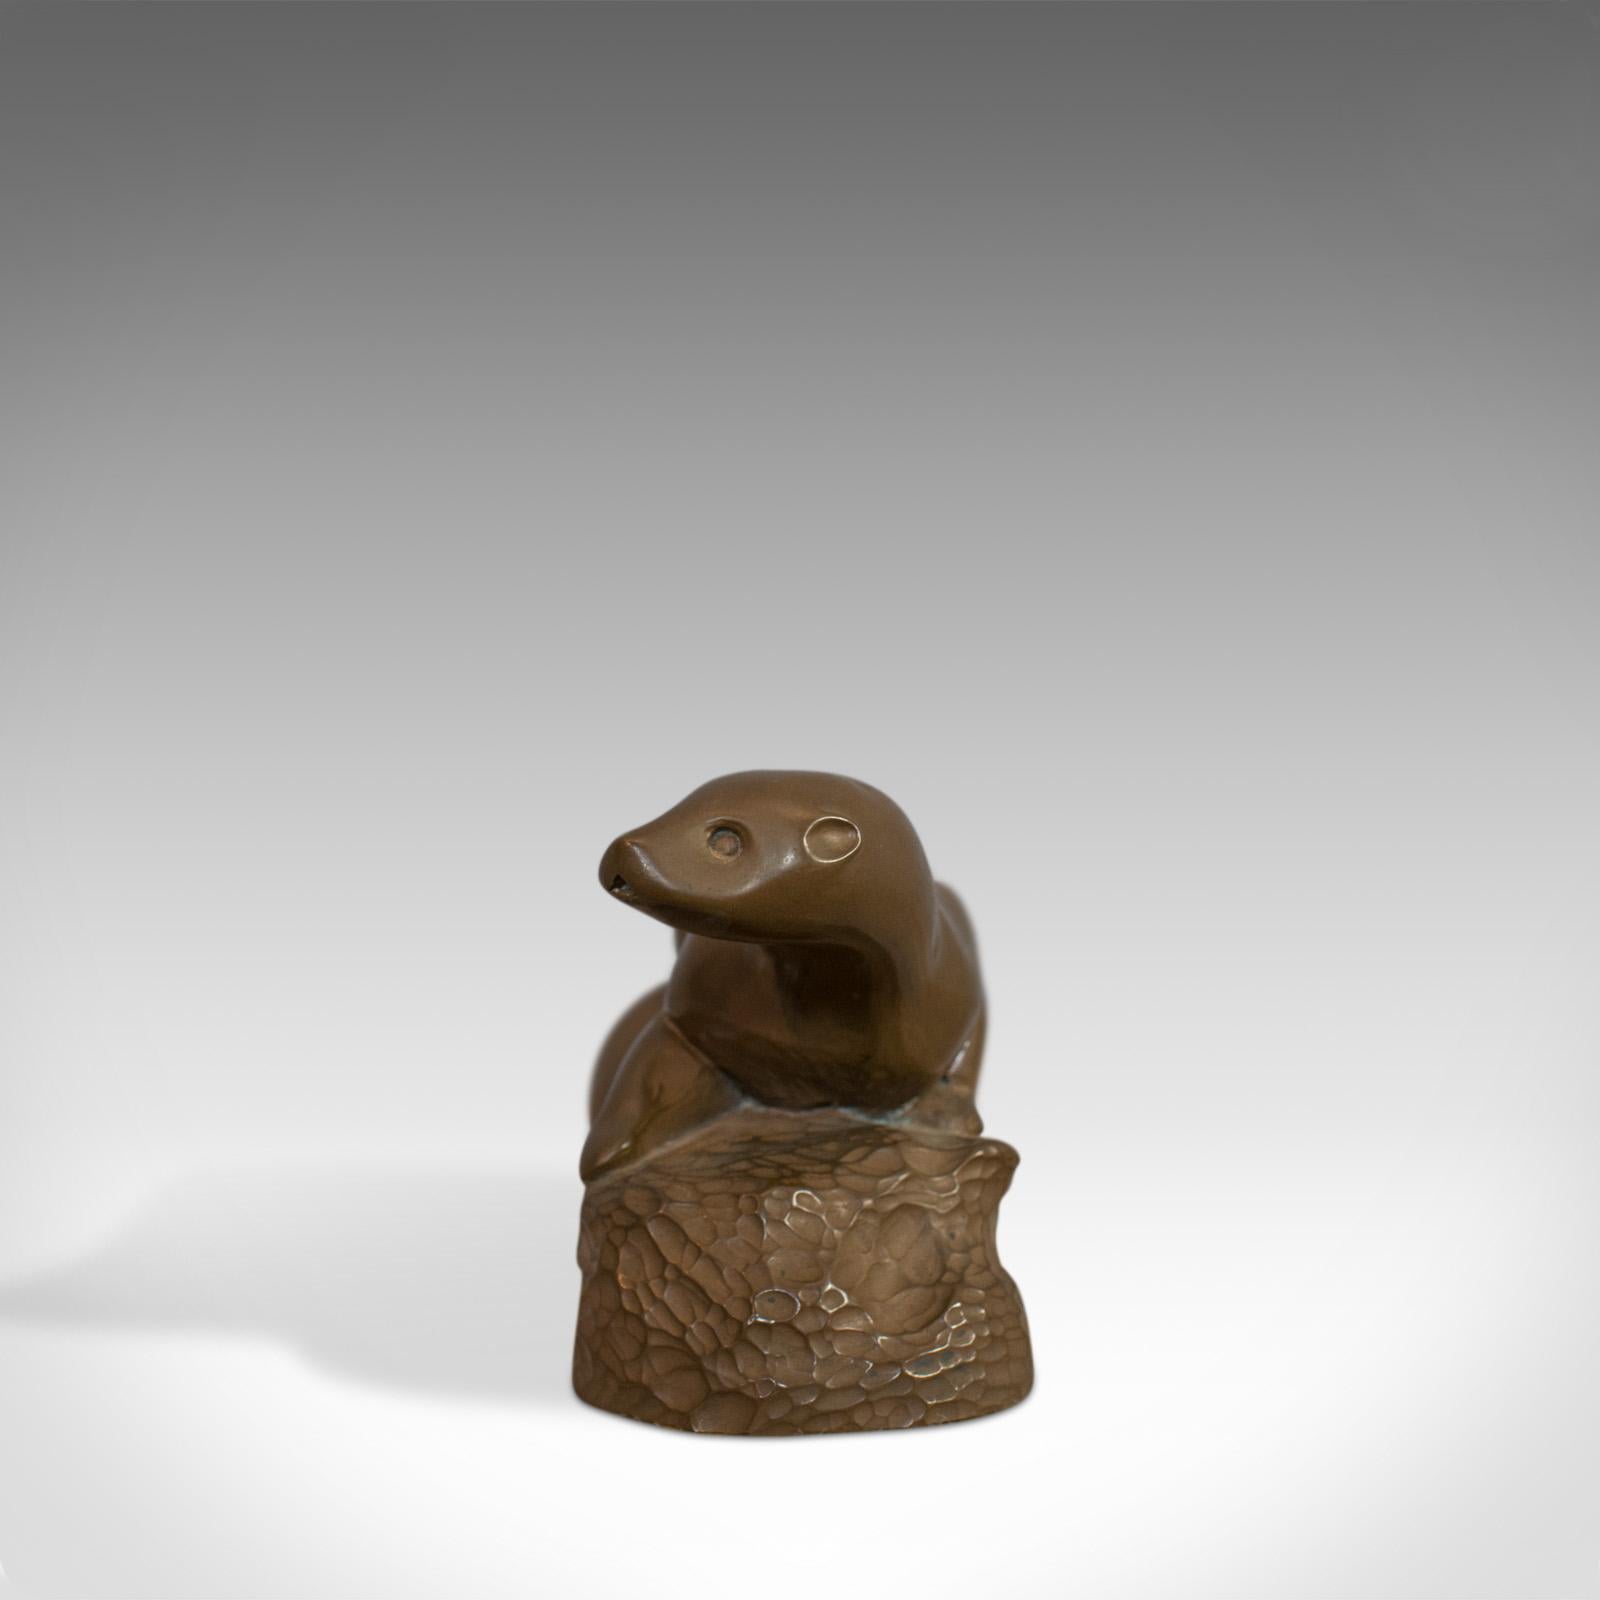 This is a vintage decorative otter. A French, bronze spelter Art Deco ornament dating to the mid-20th century, circa 1940.

Good consistent hues throughout and displaying a desirable aged patina
Generous weight and proportions
Lithe form showing